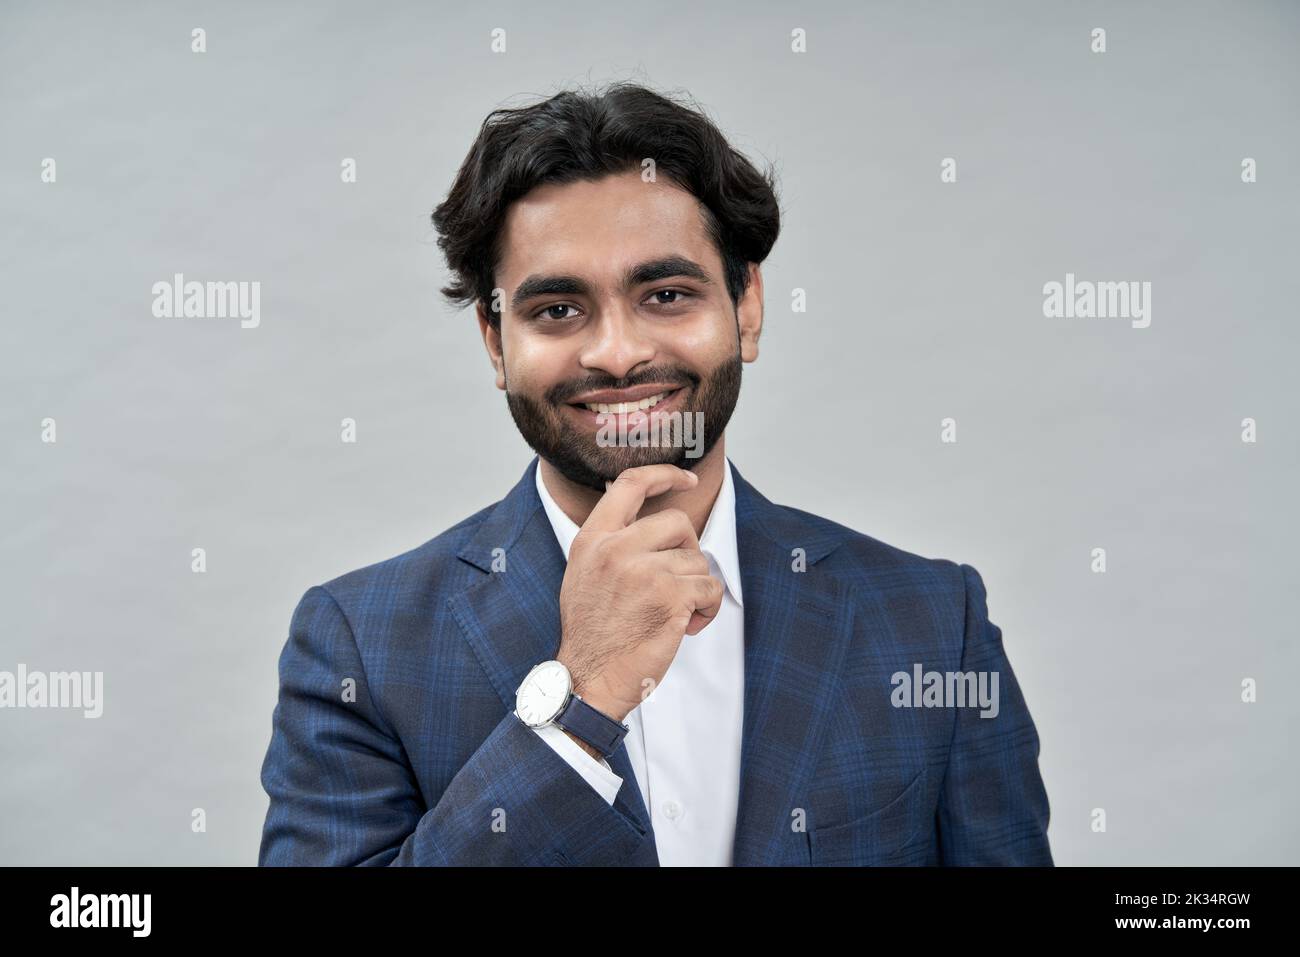 Happy young indian arab business man wearing suit. Headshot portrait Stock Photo